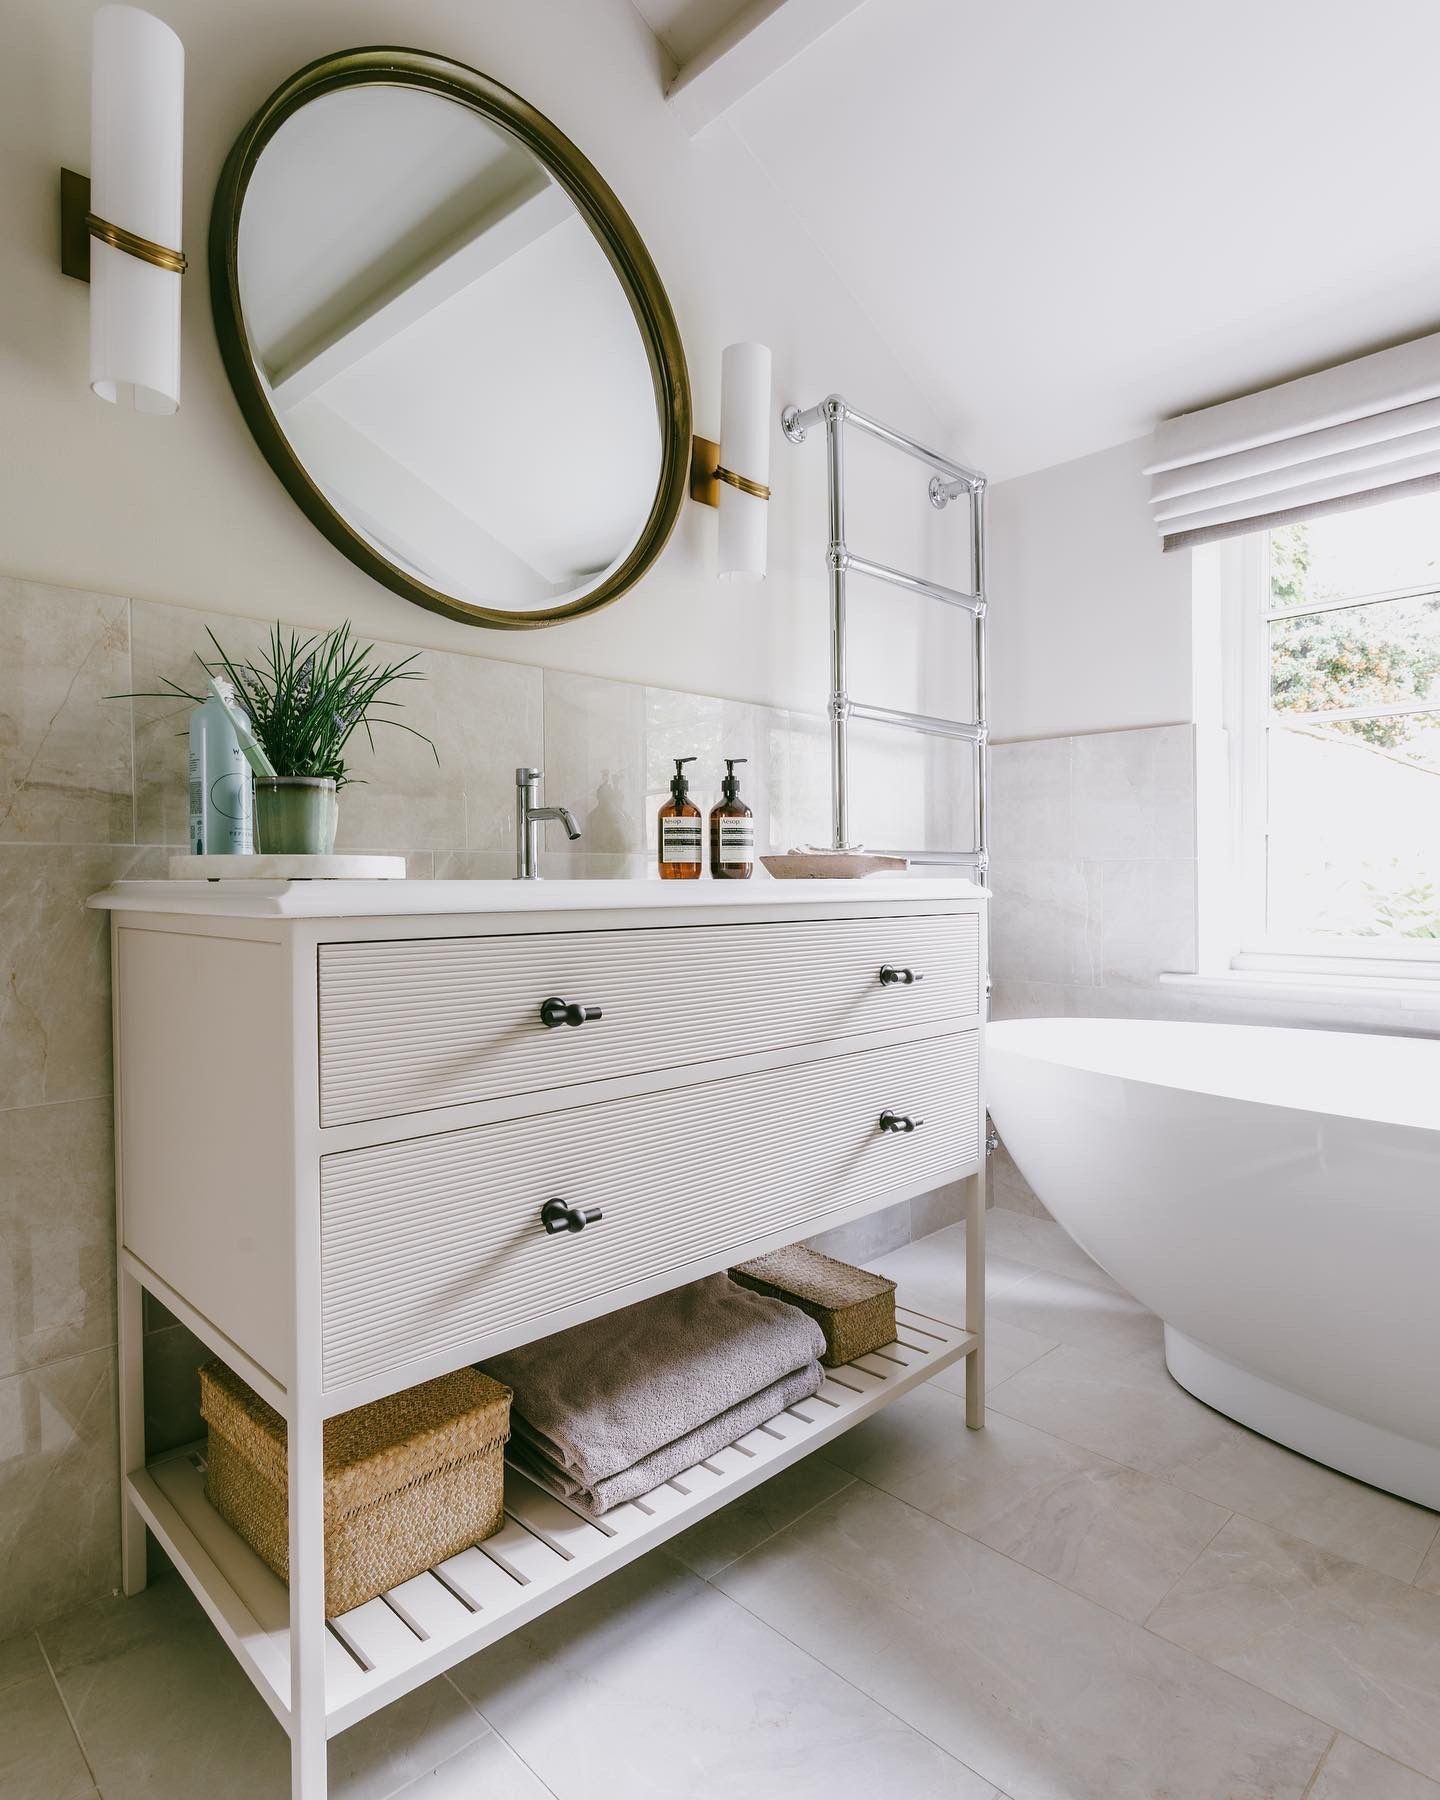 Maximizing Space in Your Bathroom with Countertop Storage